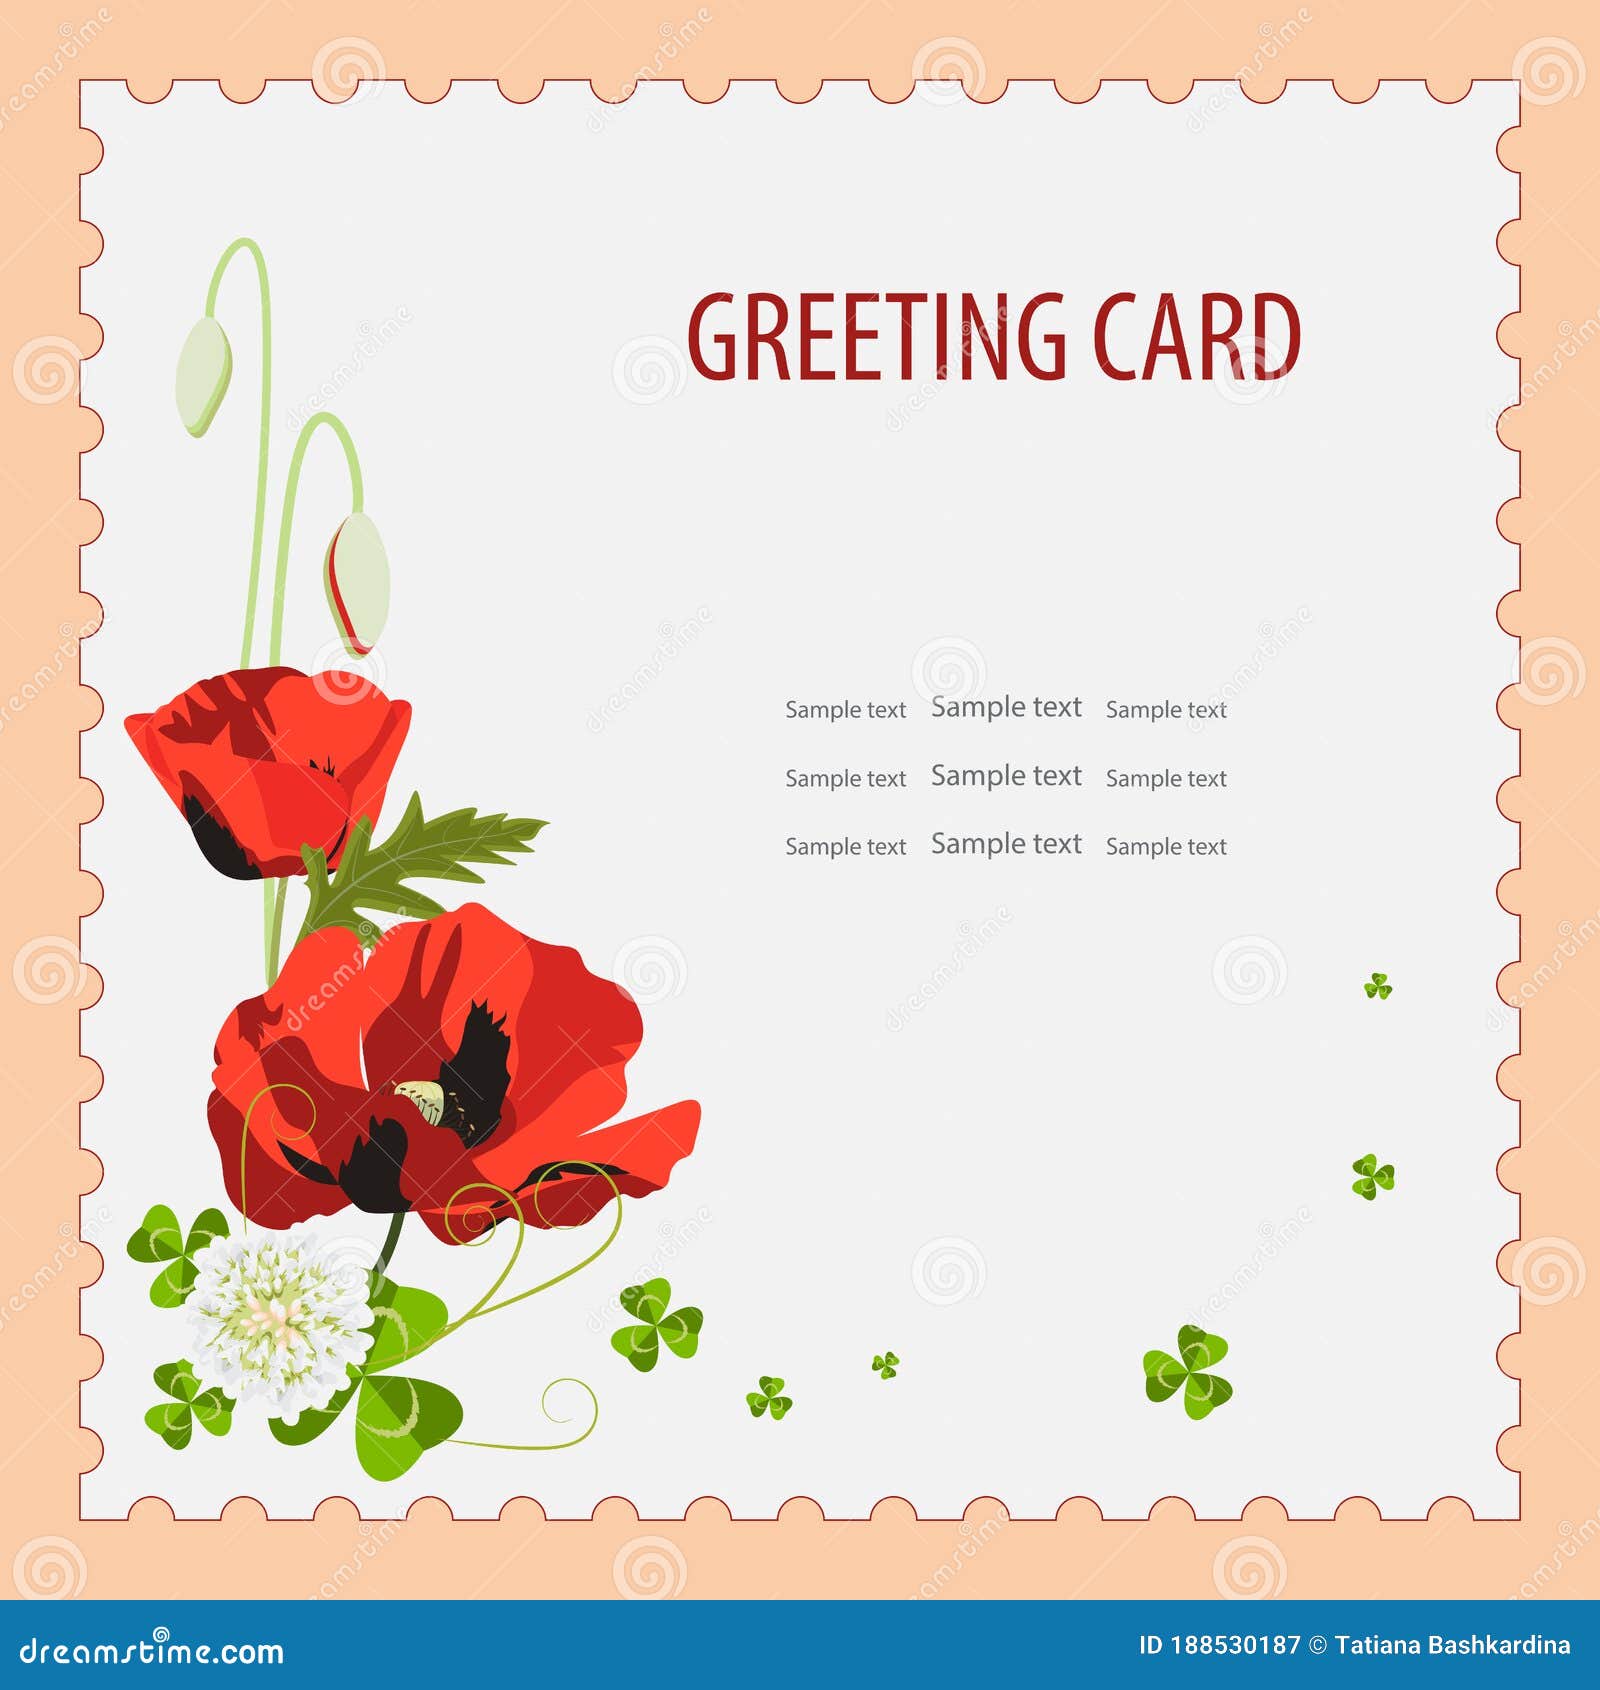 Red Poppy, Small White Blooming Clover Flowers, Green Leaves With Small Greeting Card Template